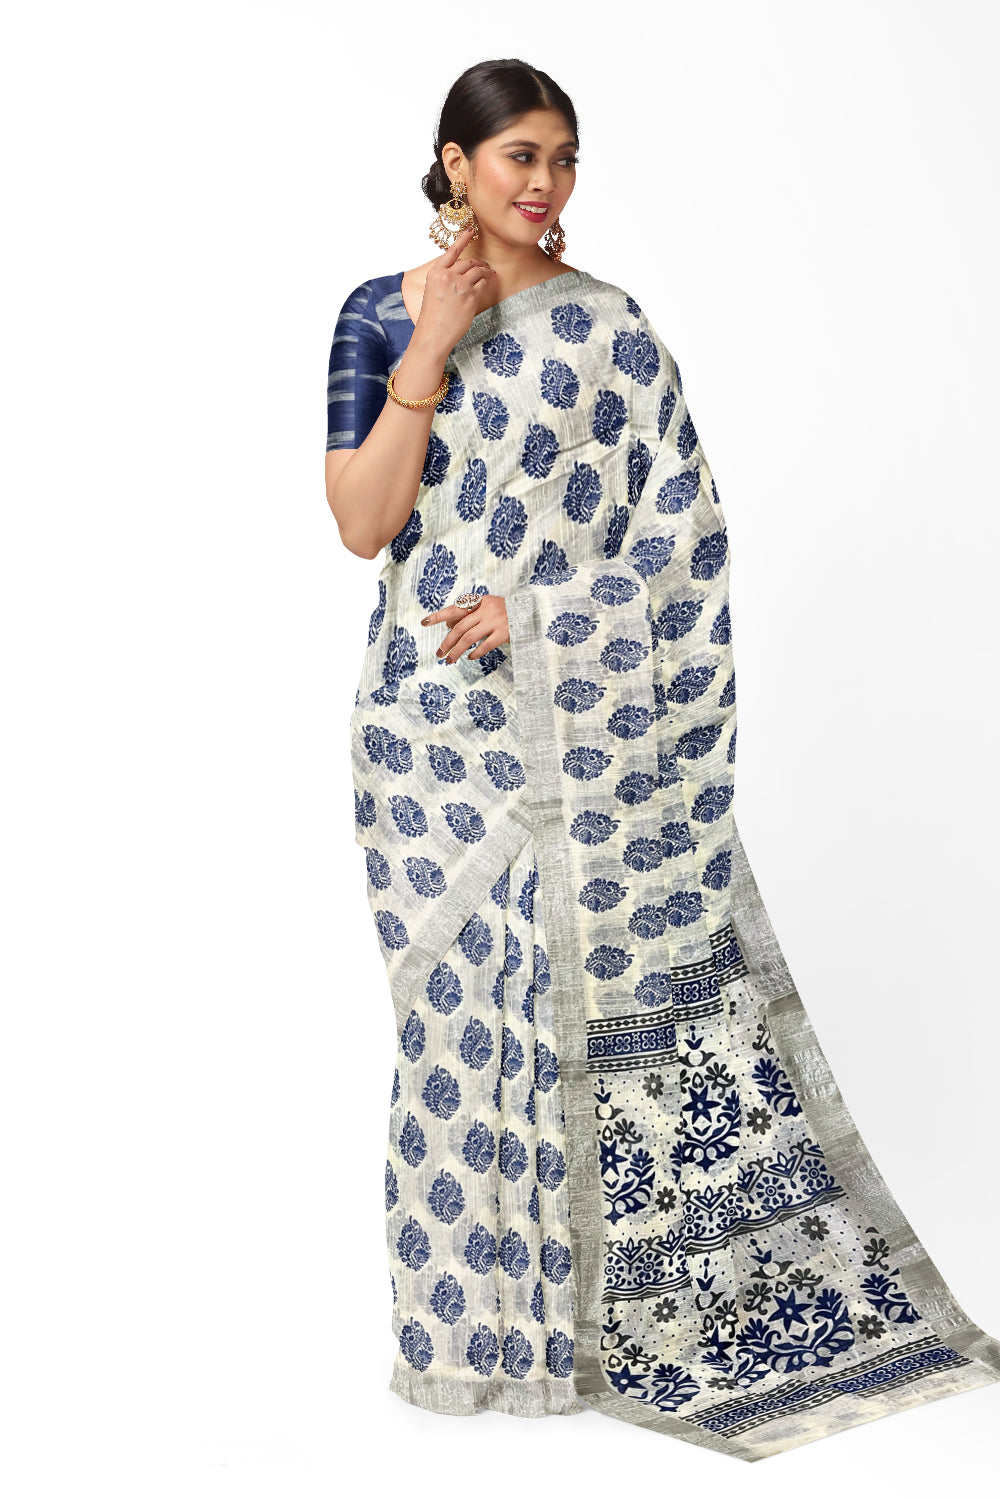 Southloom Linen White Saree with Blue Designer Prints and Tassels works on Pallu